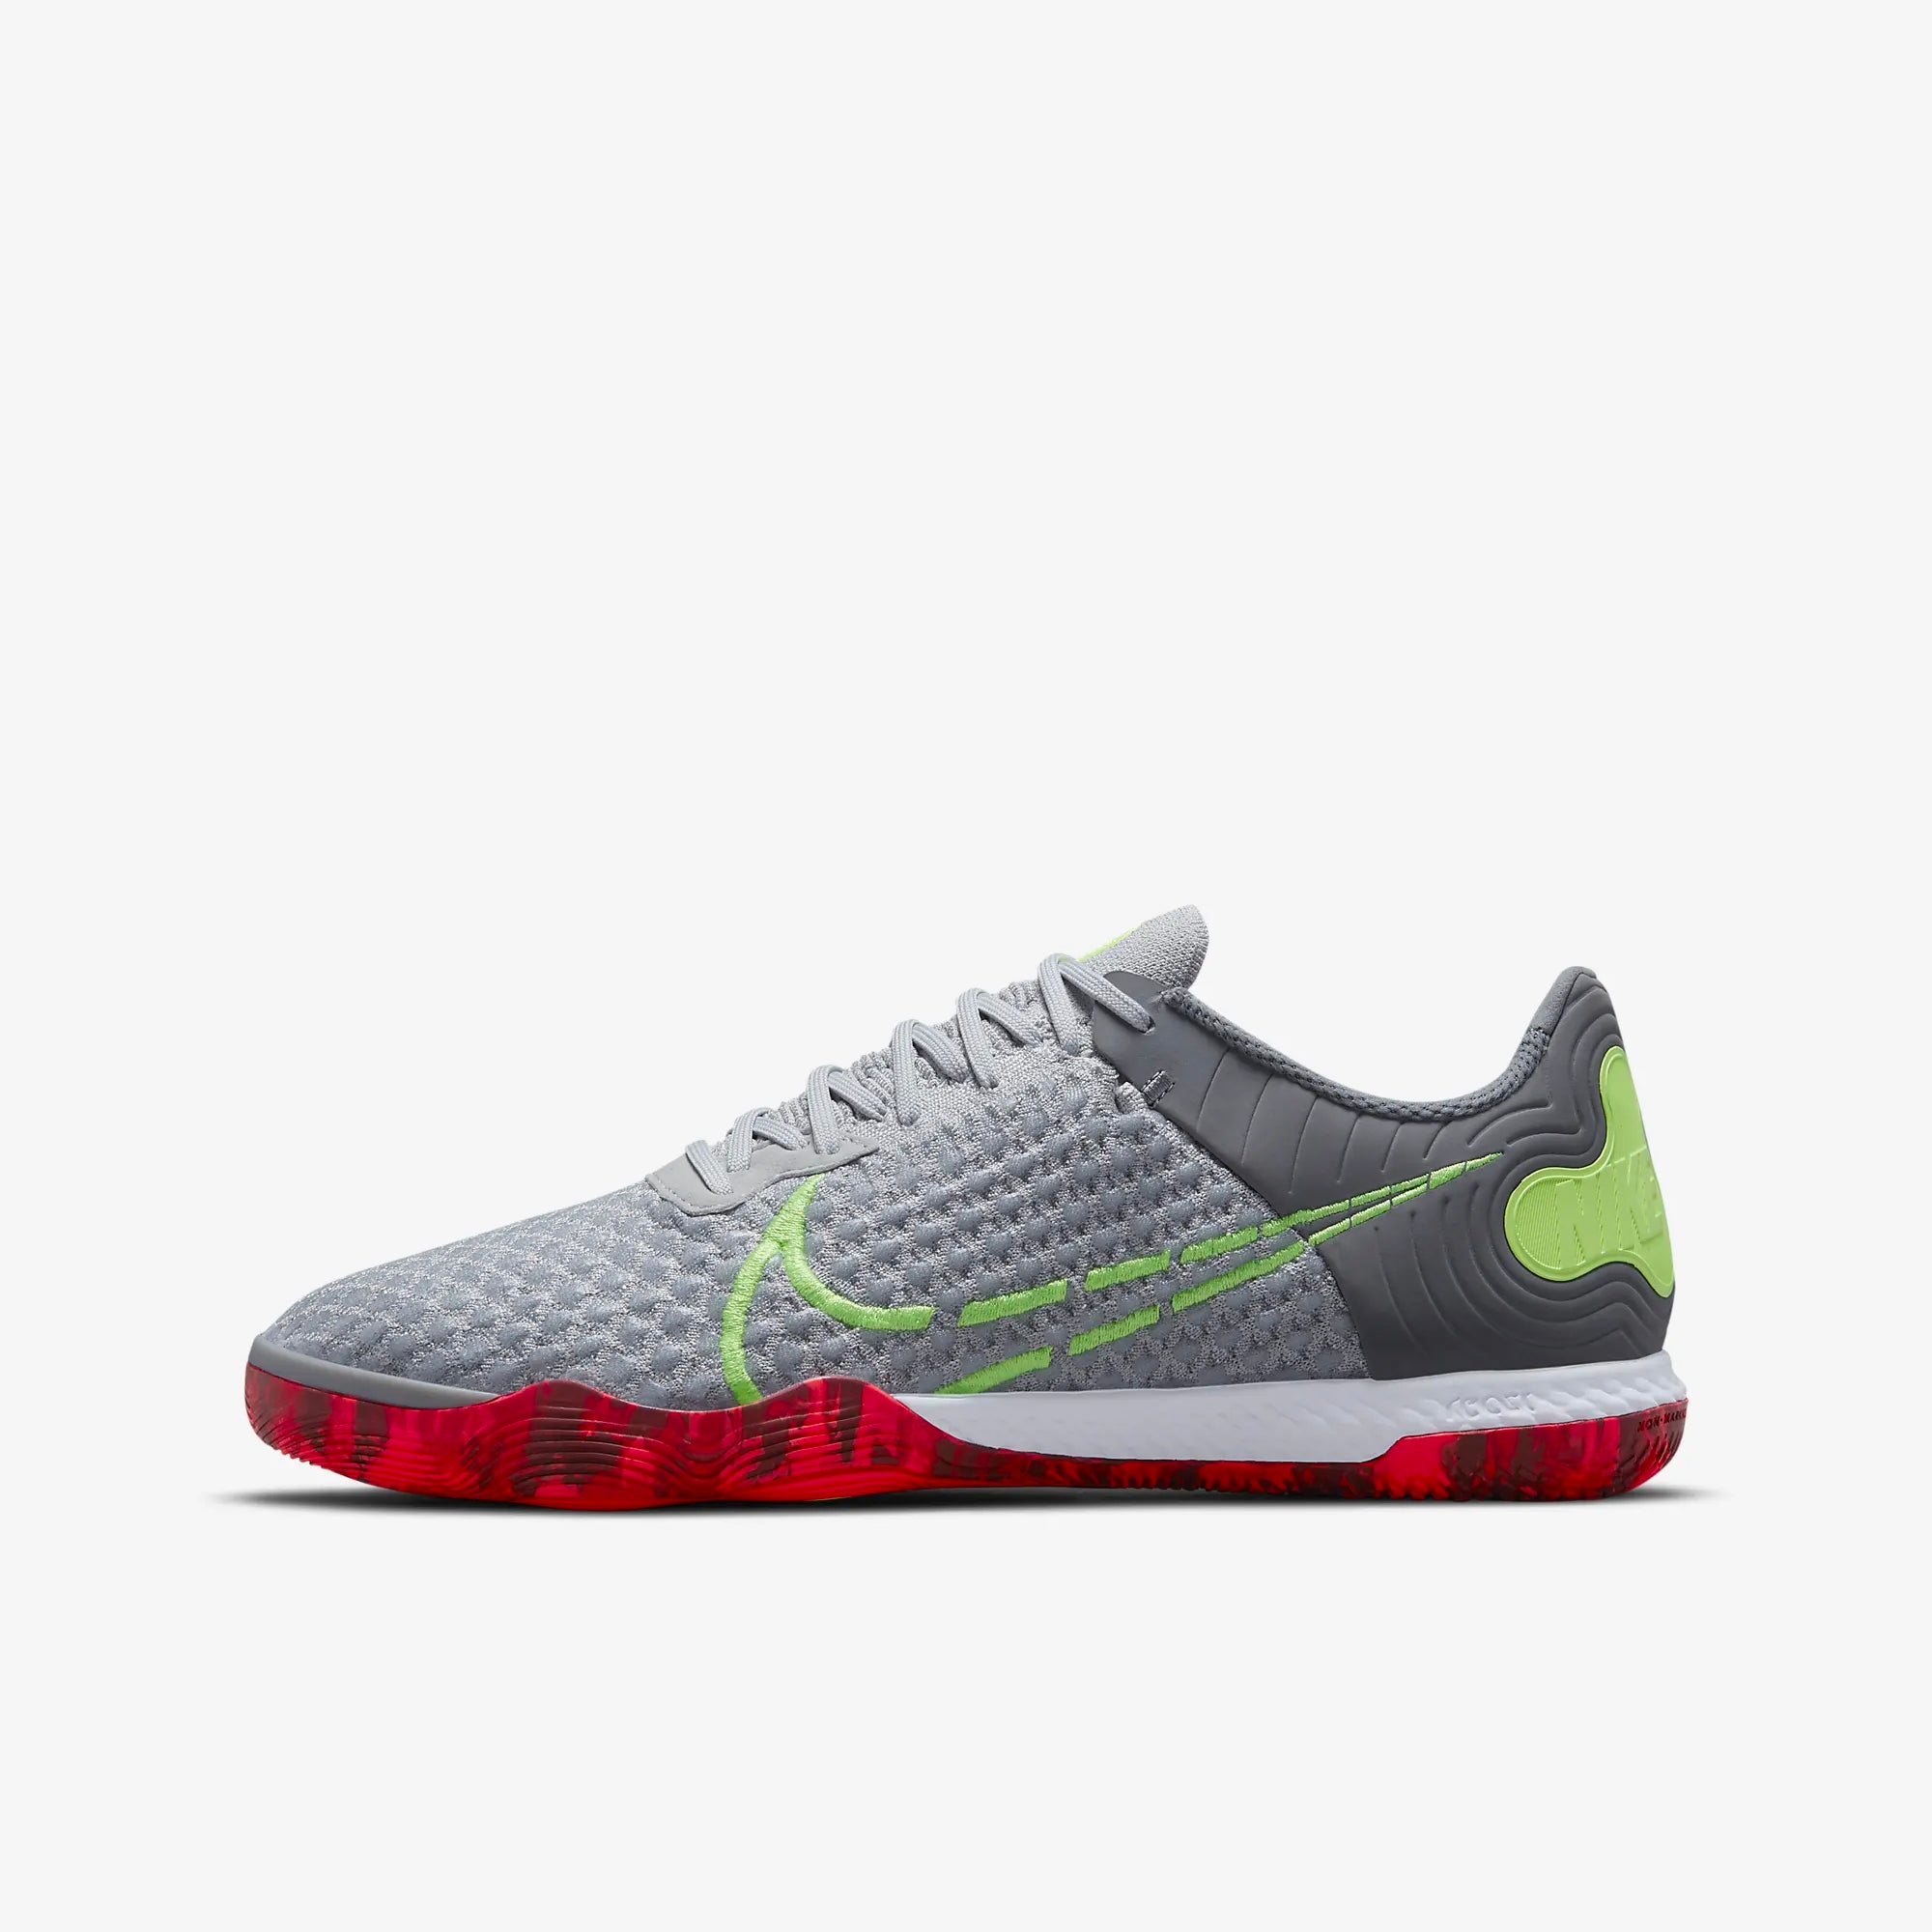 Nike React Indoor/Court Soccer Shoes